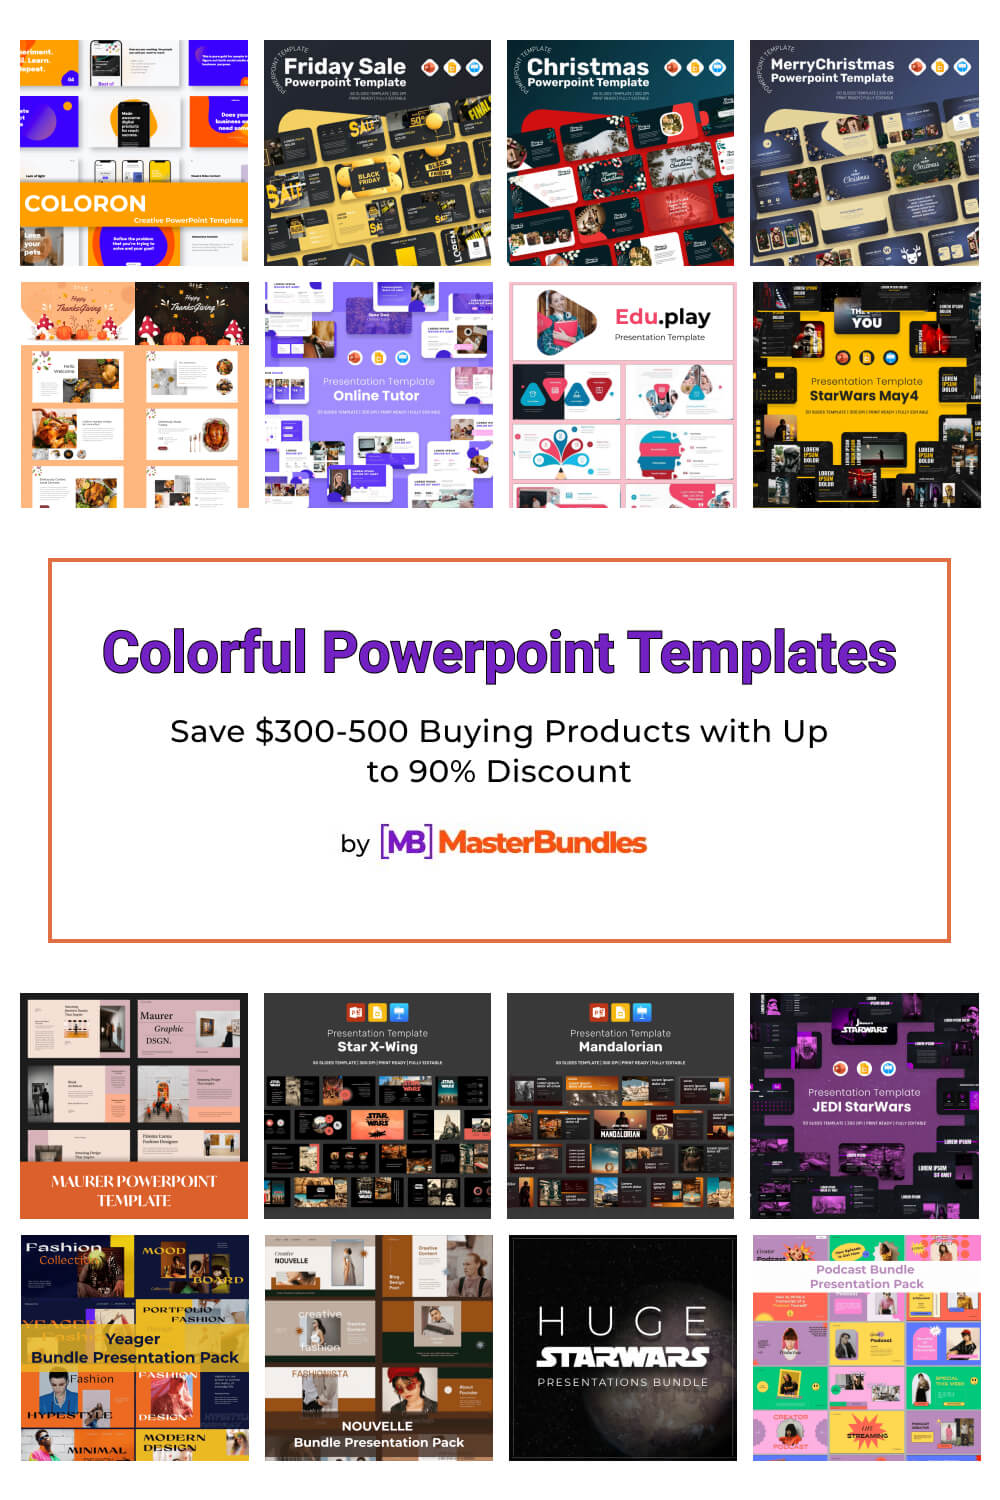 colorful powerpoint templates pinterest image.